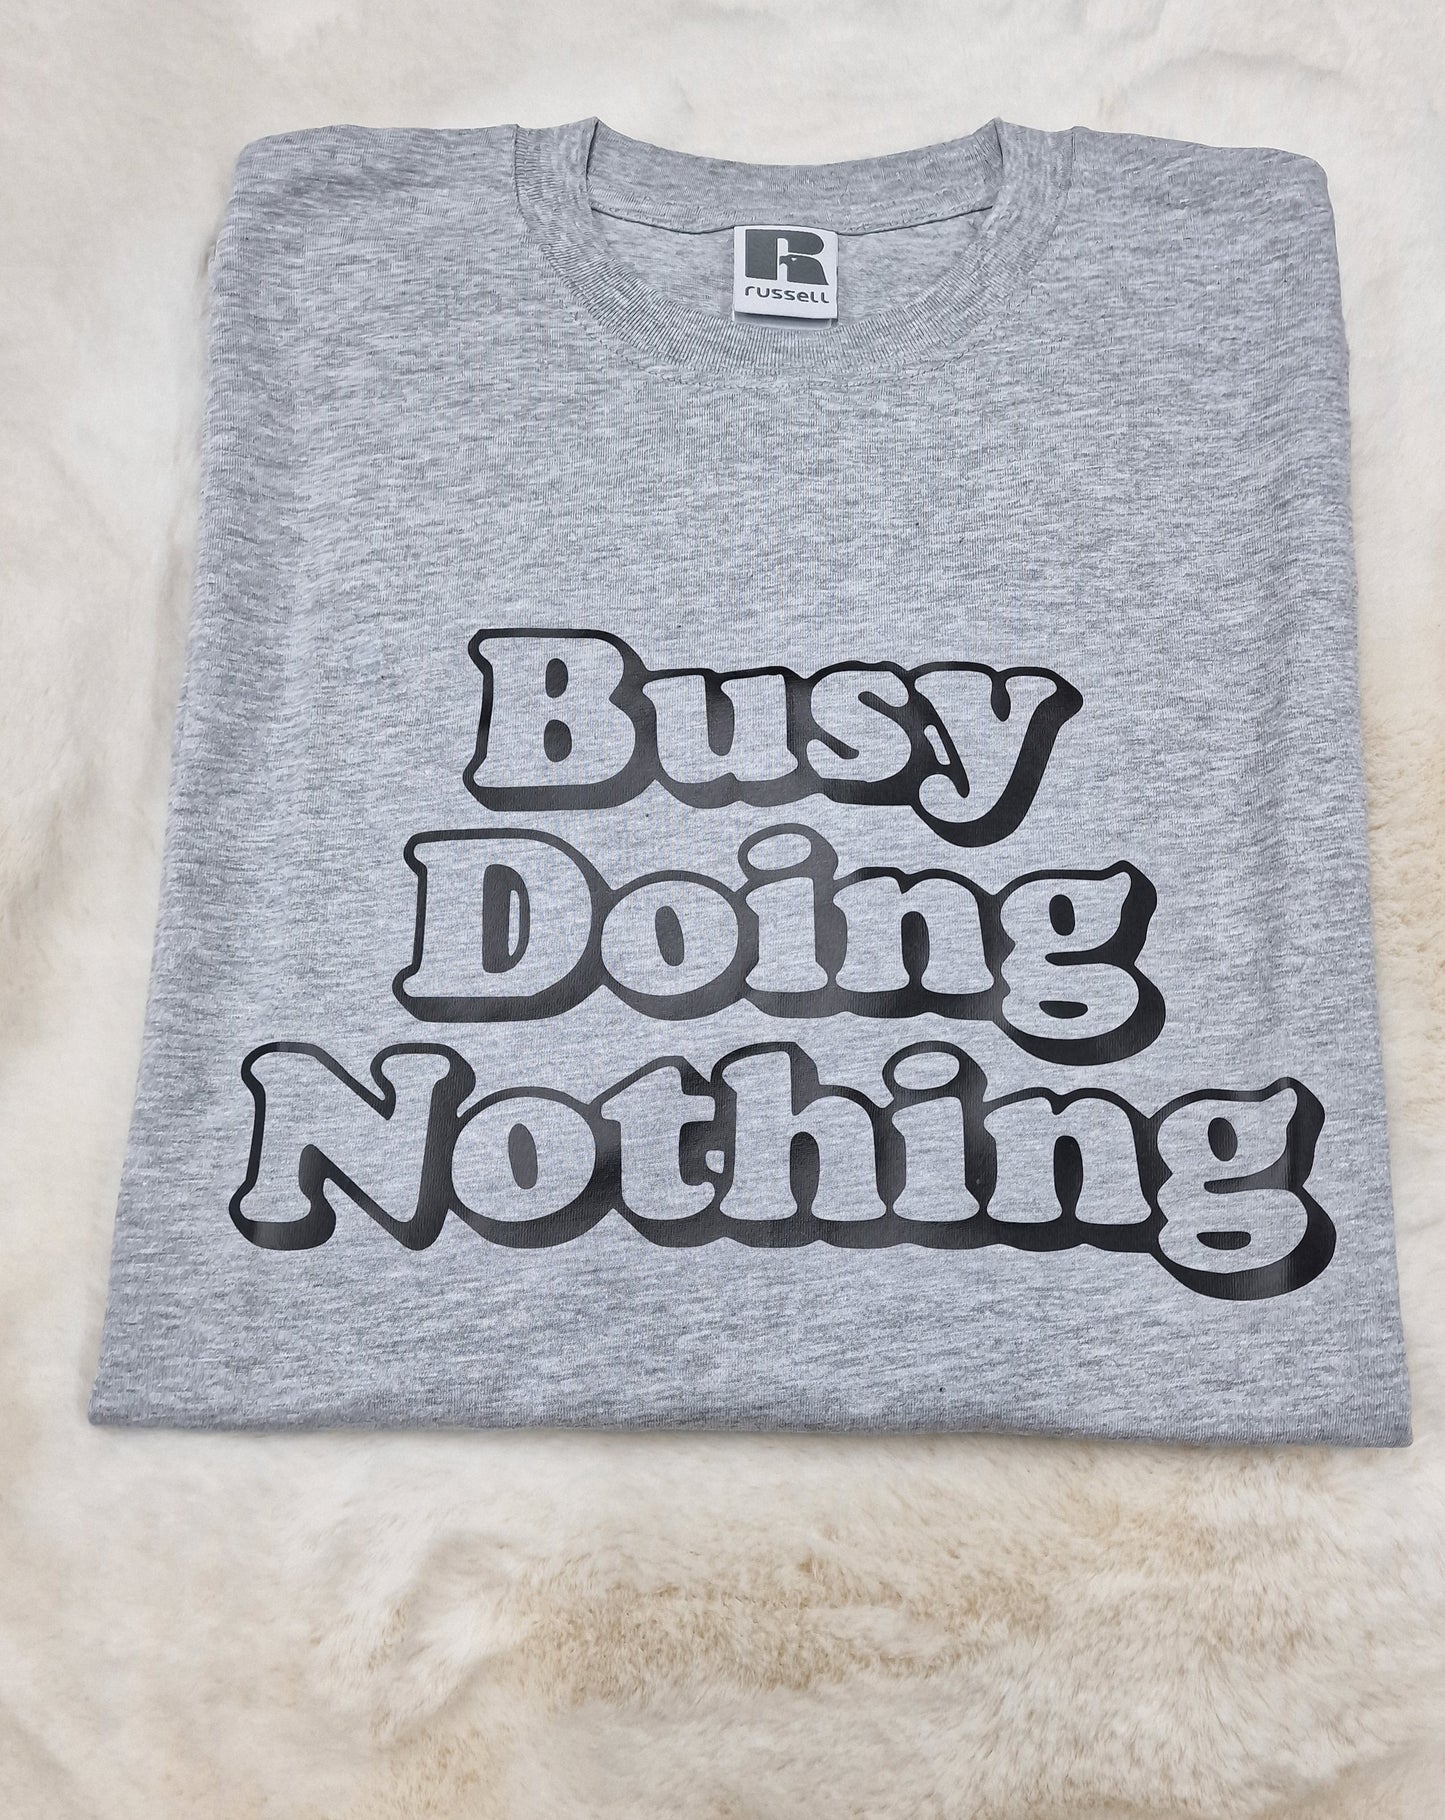 Busy doing nothing Tee